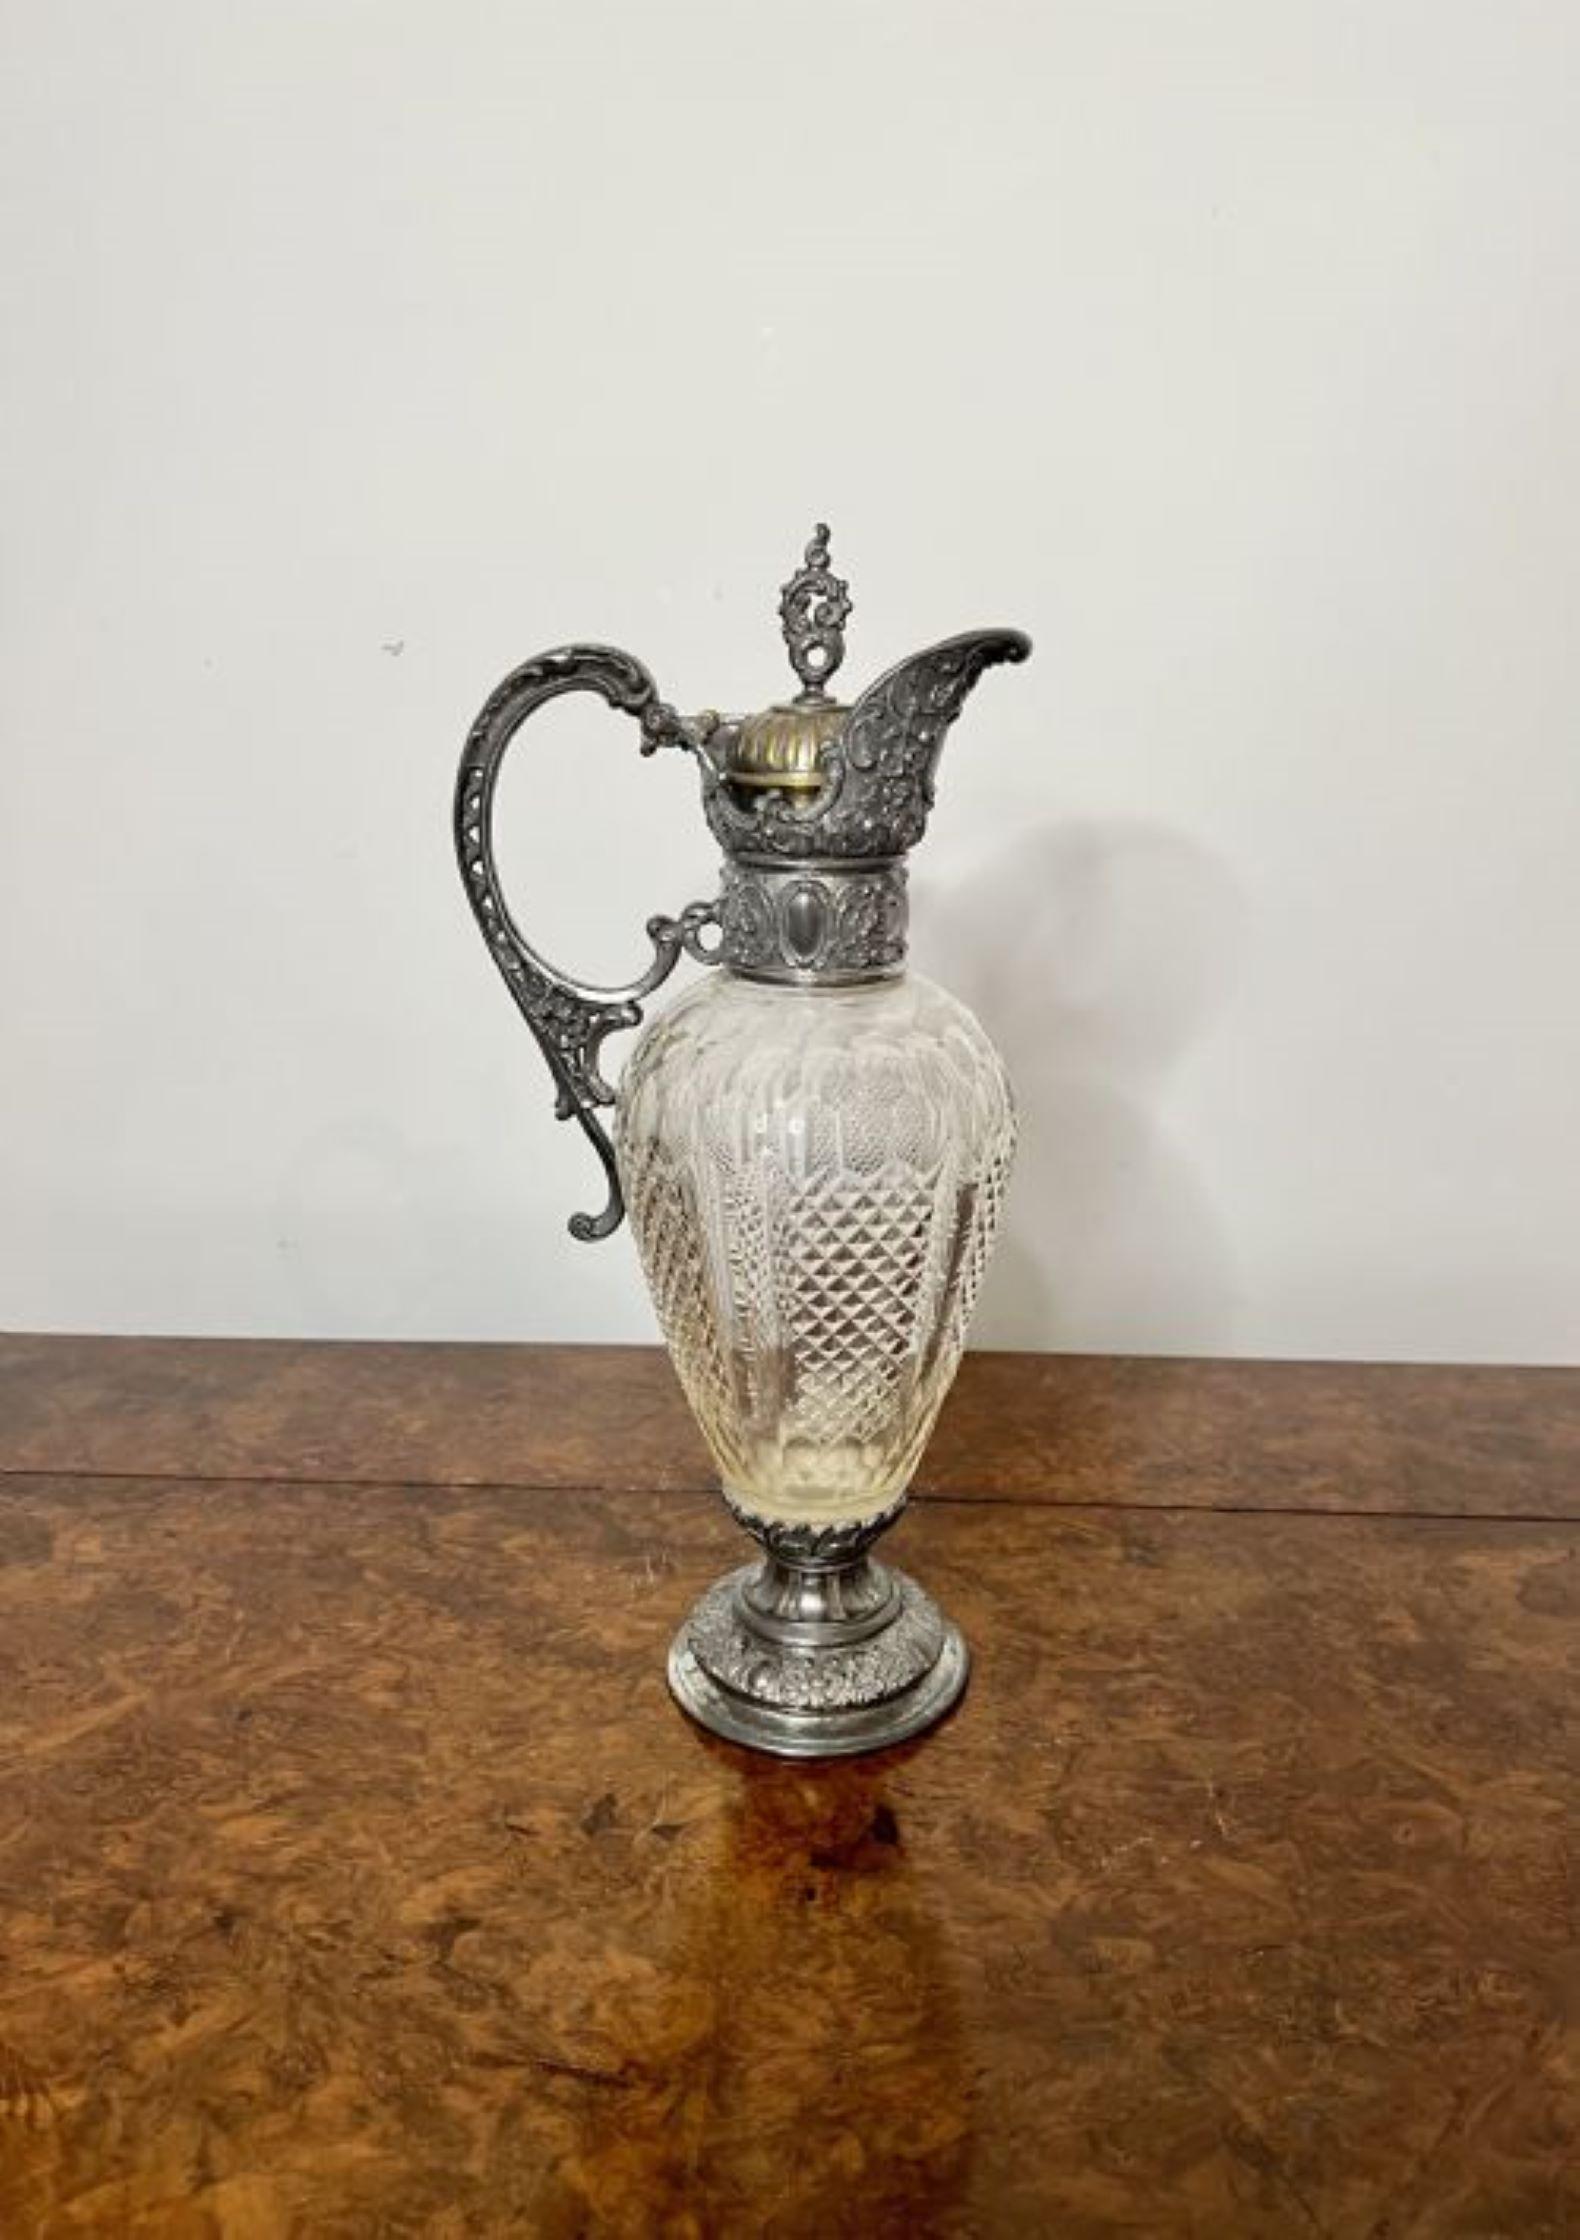 Fantastic quality antique Victorian cut glass and claret jug having a fantastic quality antique Victorian claret jug with a wonderful cut glass circular body with a ornate silver plated shaped handle and spout with fantastic ornate detail standing